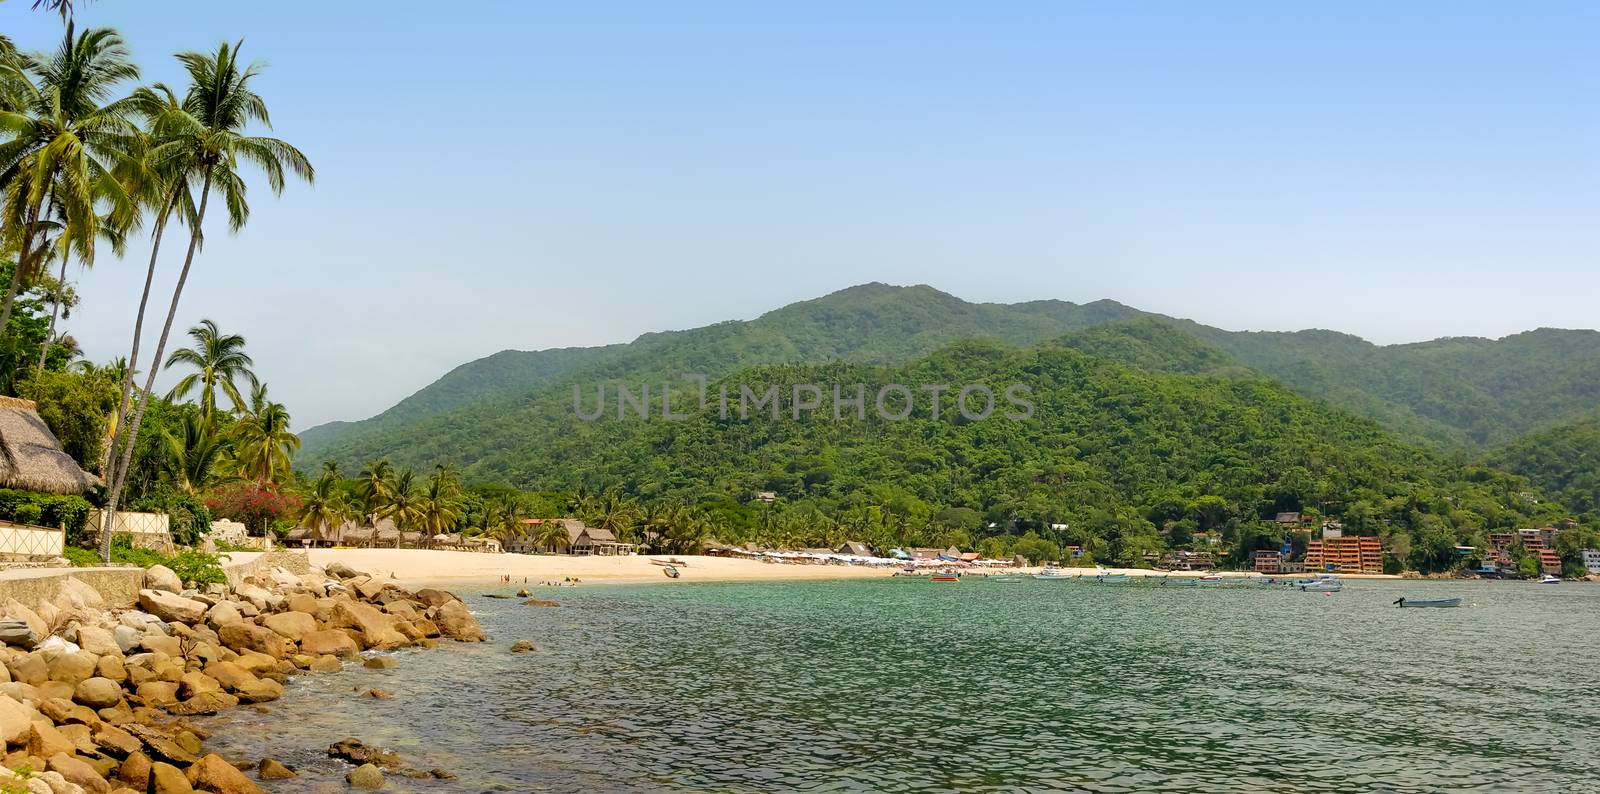 Panorama of Yelapa Beach on a sunny day, one of the most beautiful beaches near Puerto Vallarta, resort town in Mexico on the Pacific coast, in the state of Jalisco. The image was taken in July.